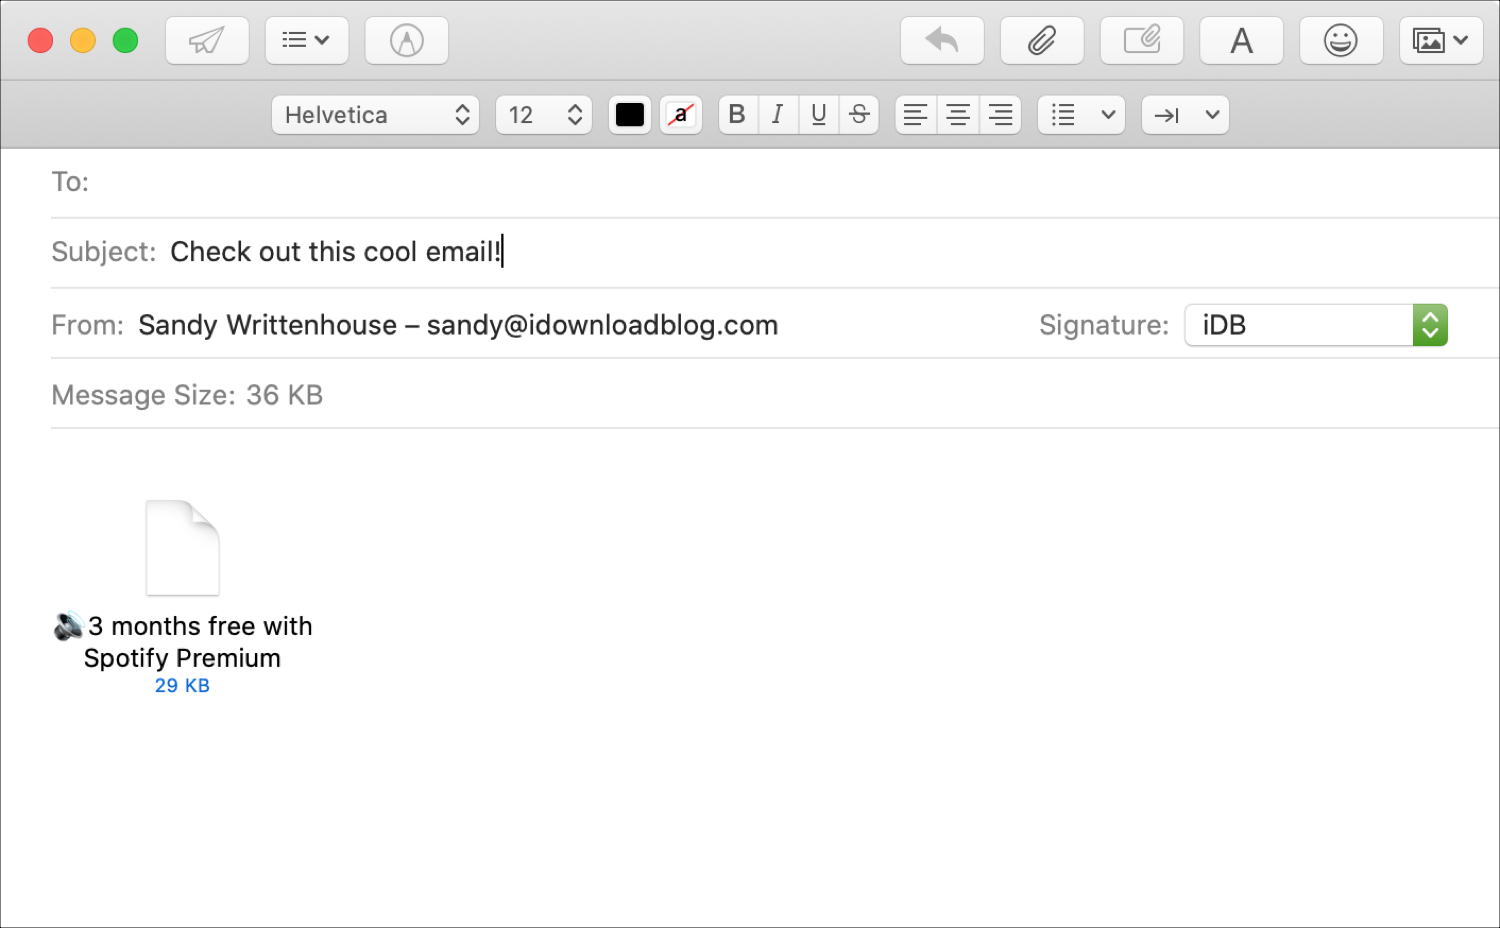 How to add an email as an attachment in Mail